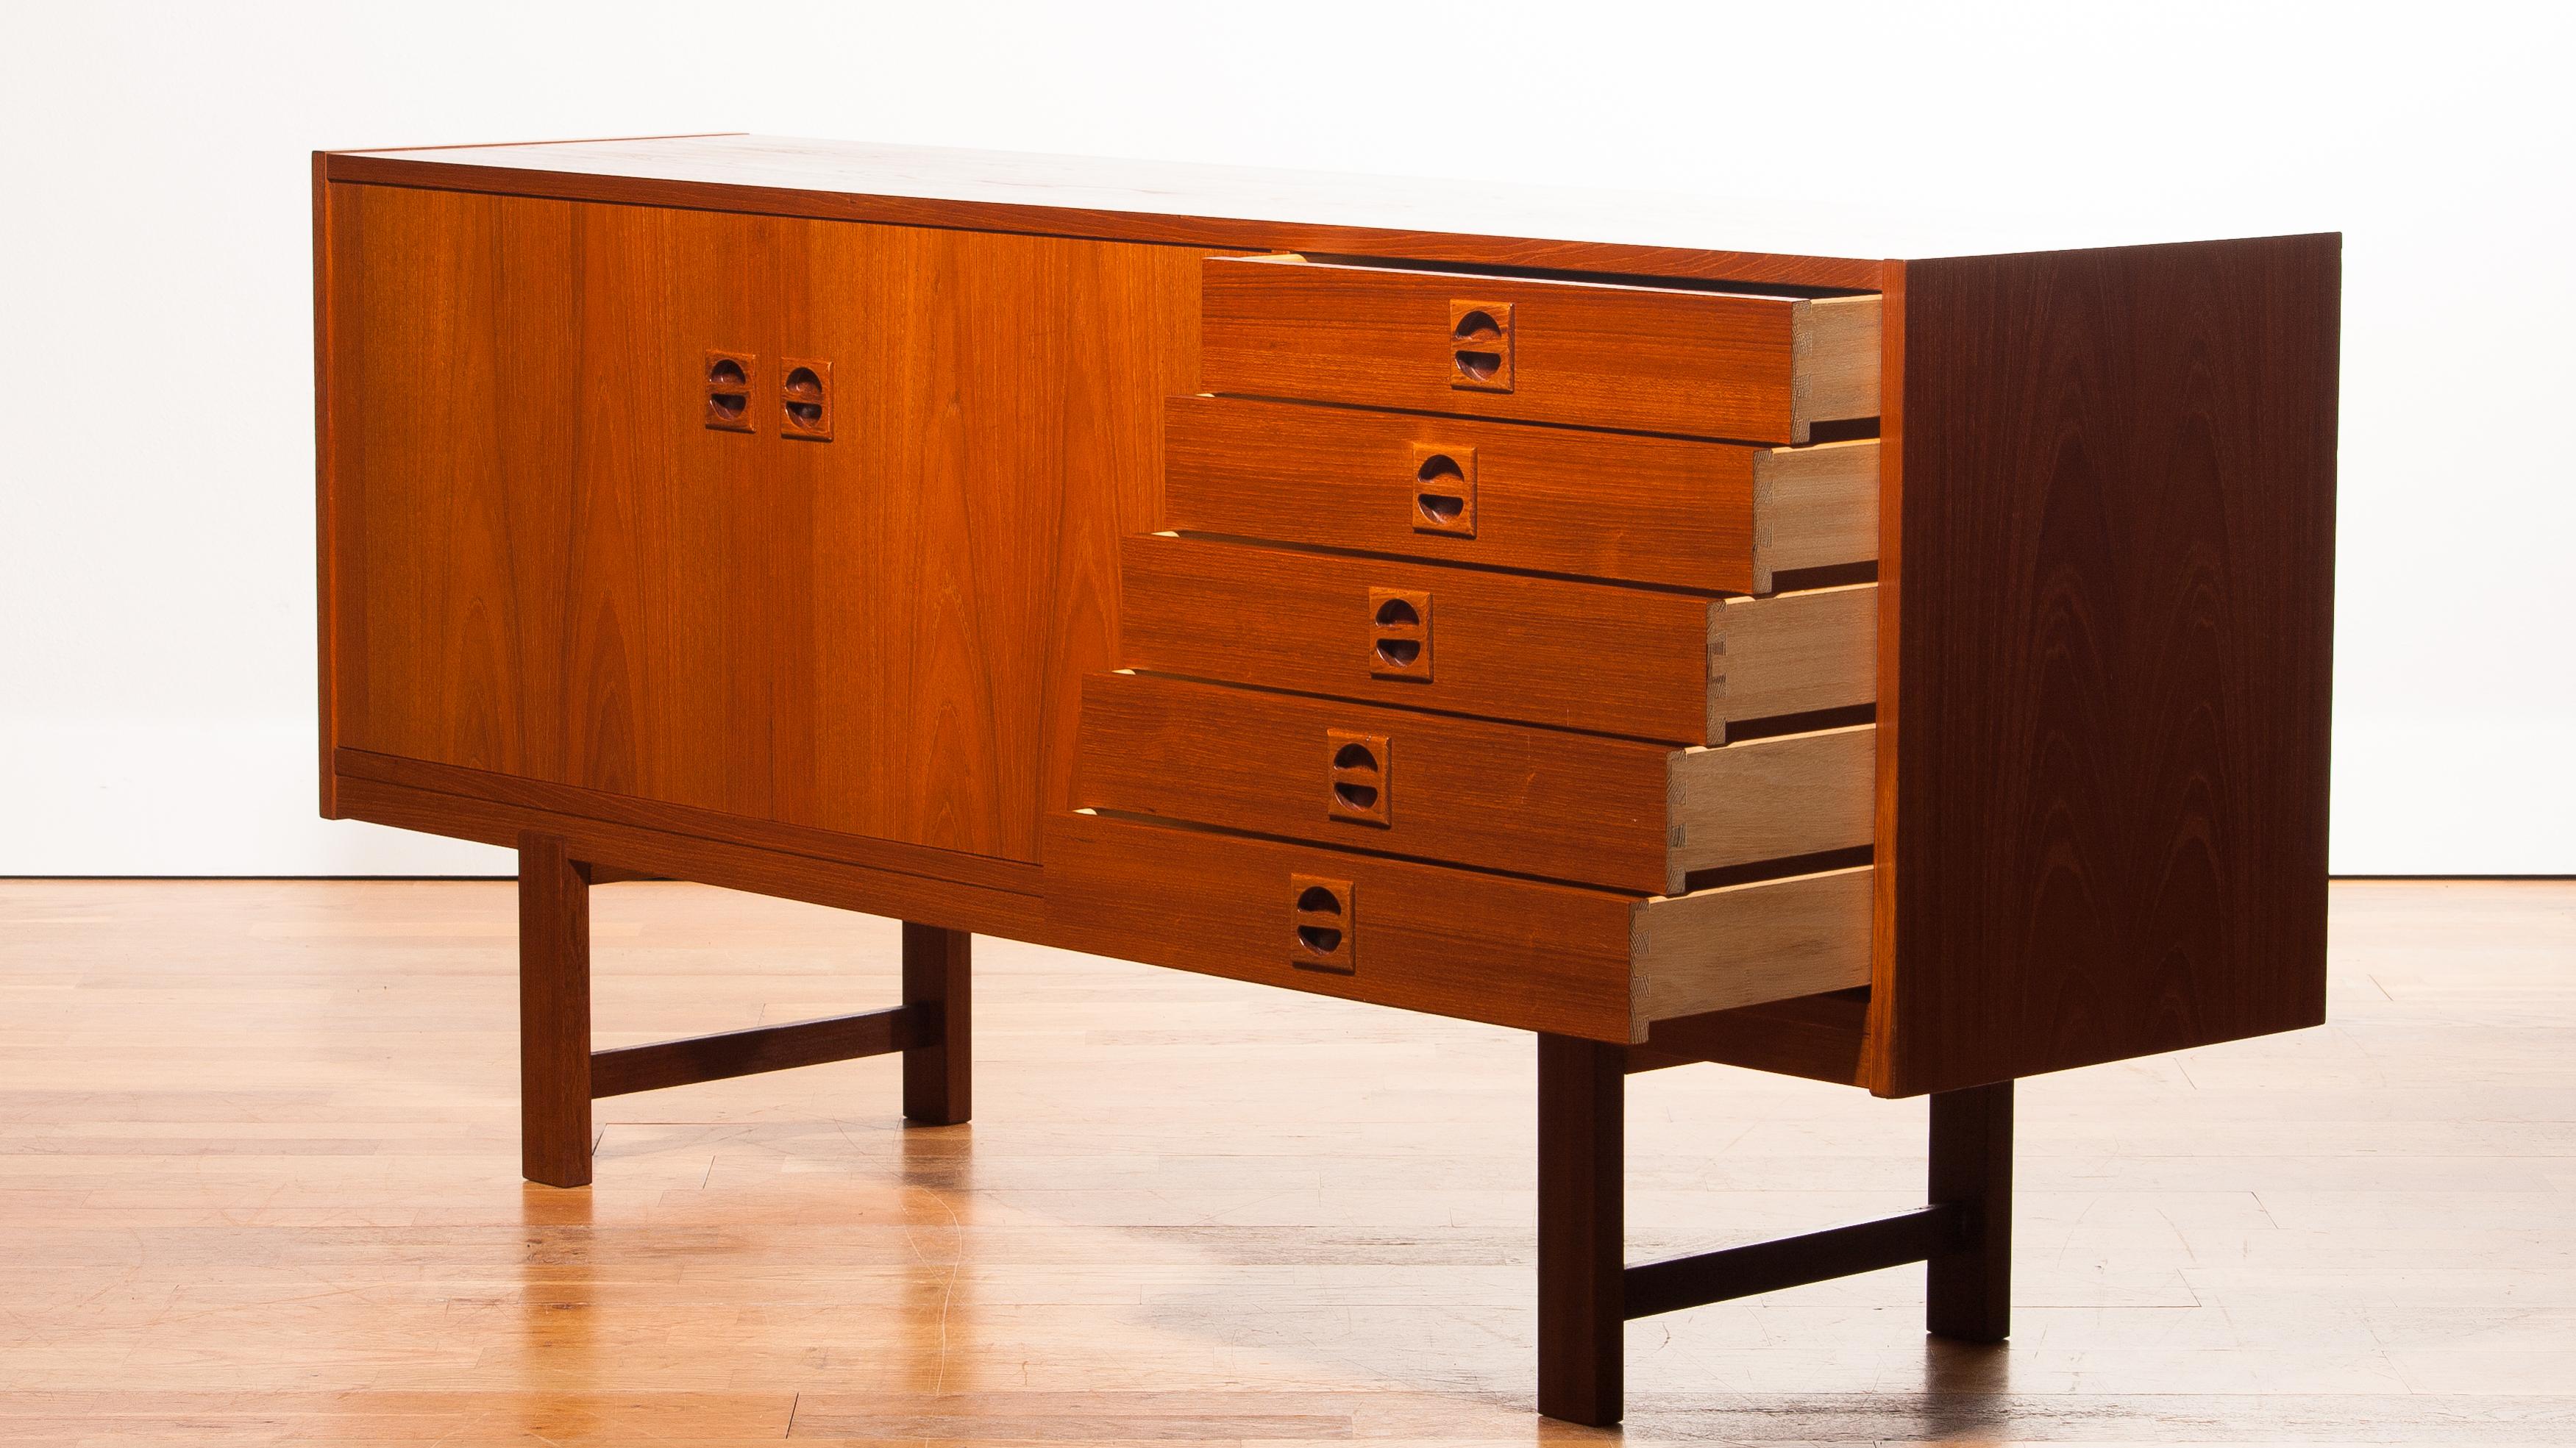 Beautiful sideboard designed by Erik Wørts, Denmark.
The cabinet is made of a very nice teak veneer and has five drawers and two doors.
It is in a wonderful condition.
Period 1950s
Dimensions: H76 cm, W 164 cm, D 42 cm.